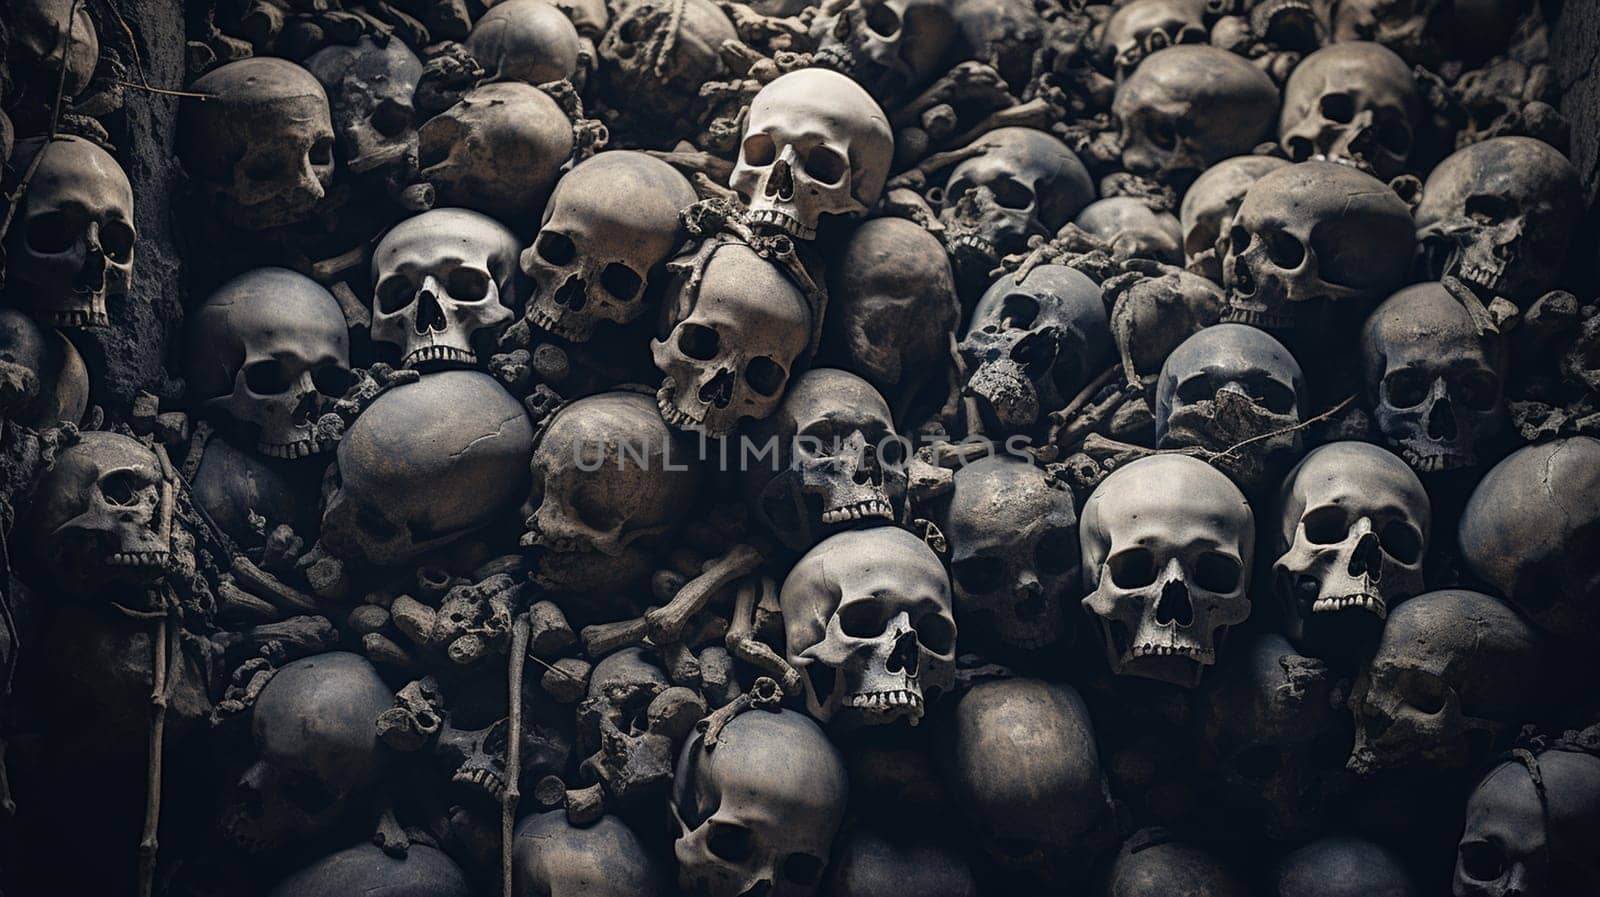 Awesome pile of skull human and bone on black cloth background, concept of scary crime scene of horror or thriller movies,Halloween theme, Still Life style, selective focus,. High quality photo